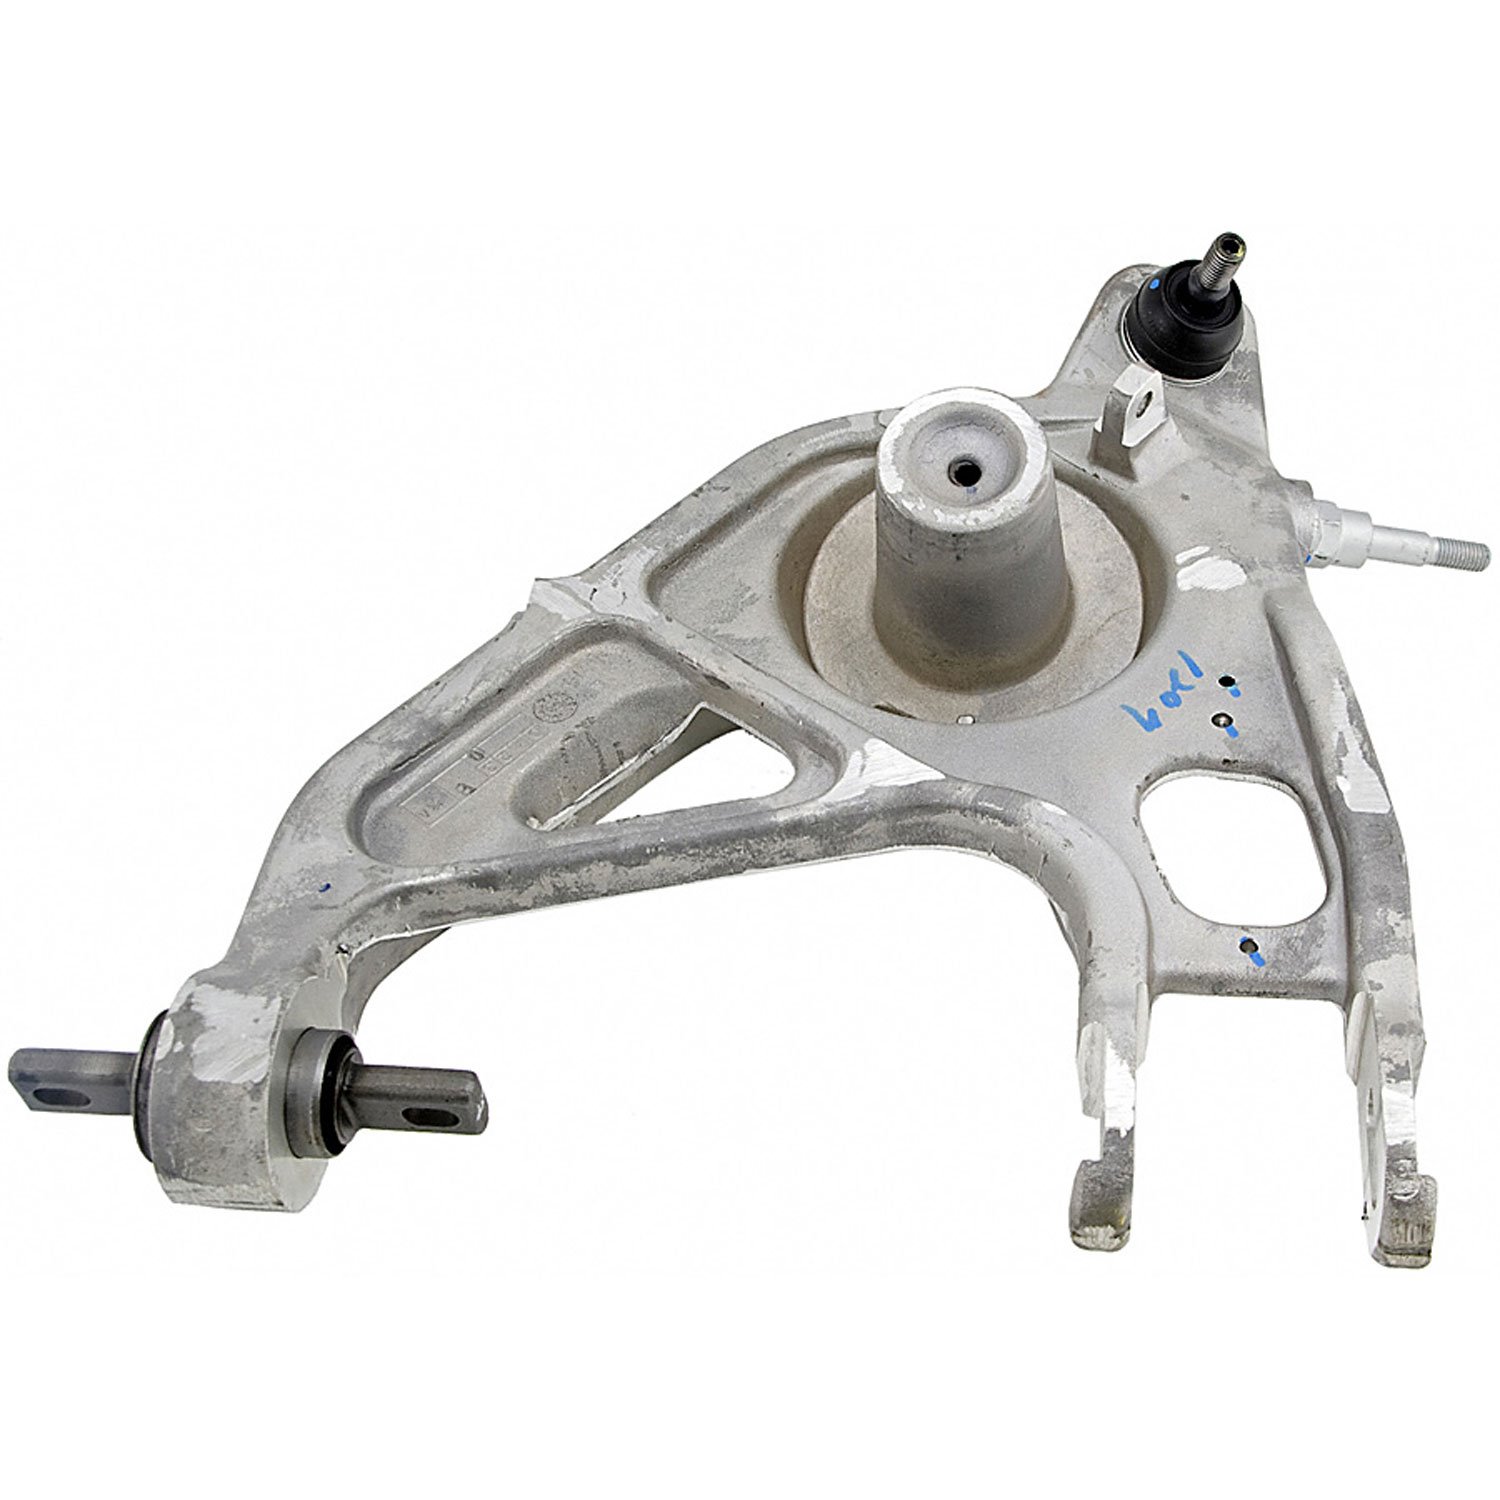 Rare Parts RP10878: CONTROL ARM W/ BALL JOINT - JEGS